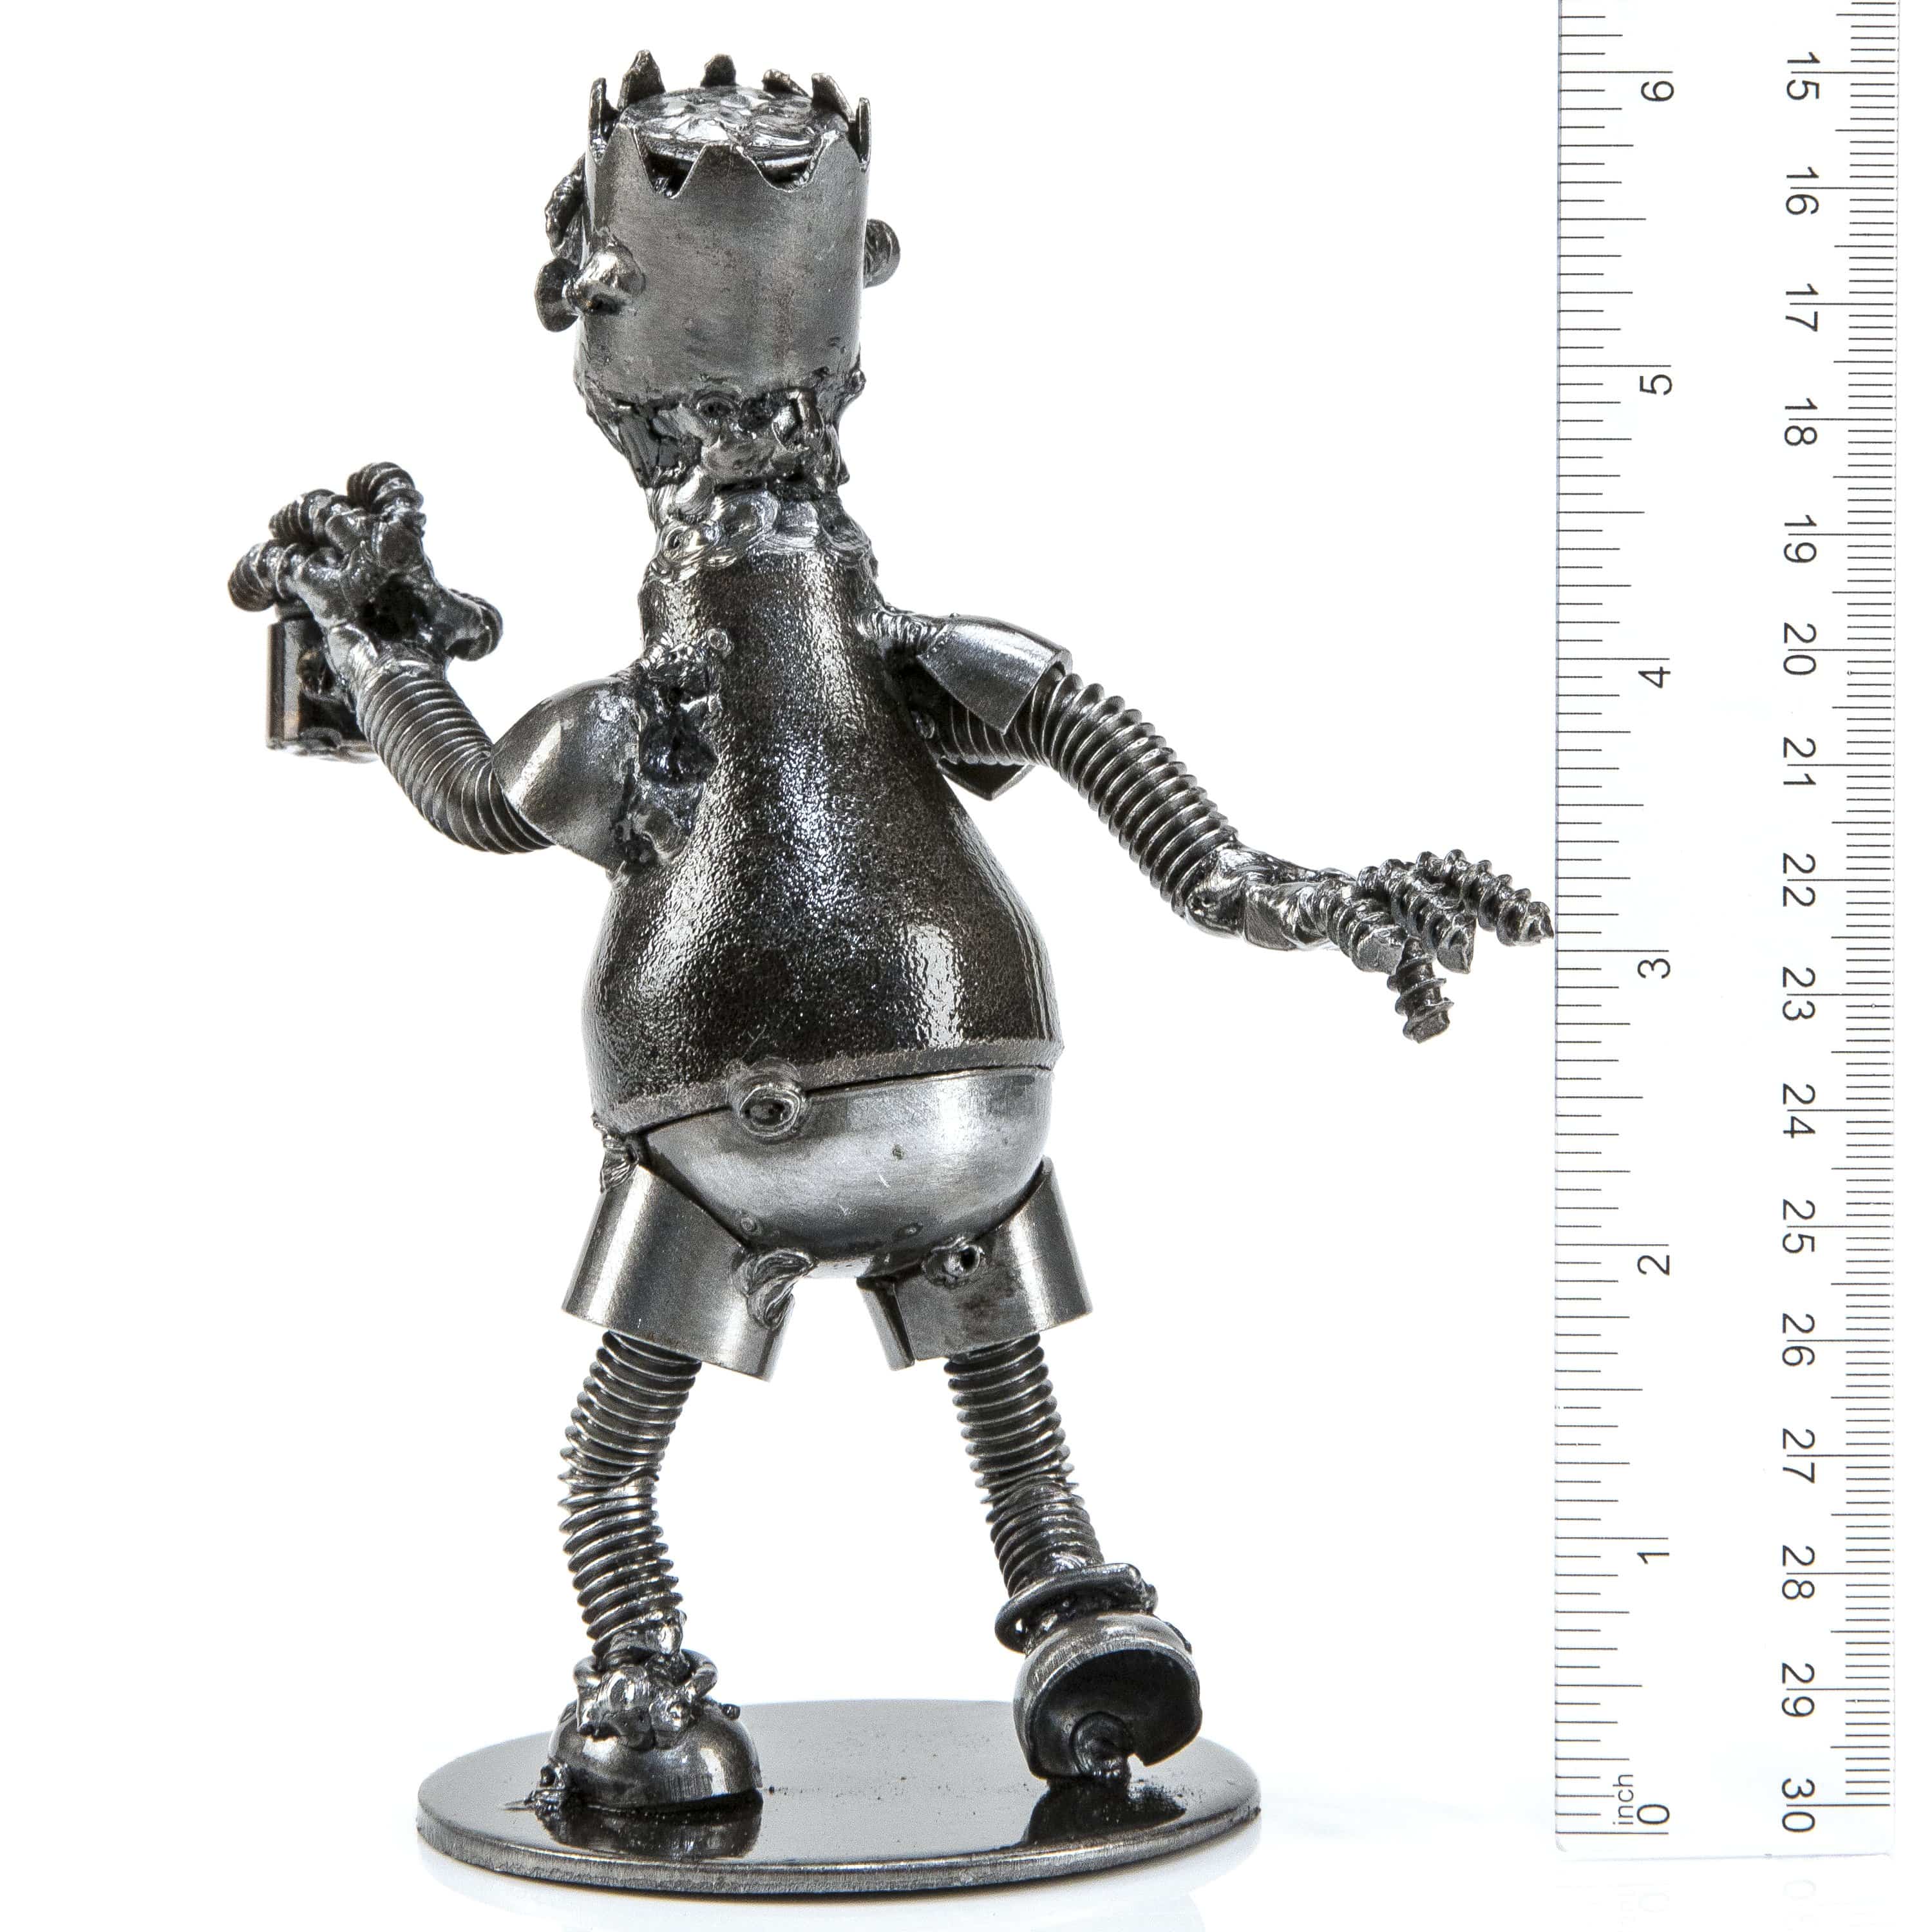 Kalifano Recycled Metal Art Bart Simpson Inspired Recycled Metal Sculpture RMS-300BS-N